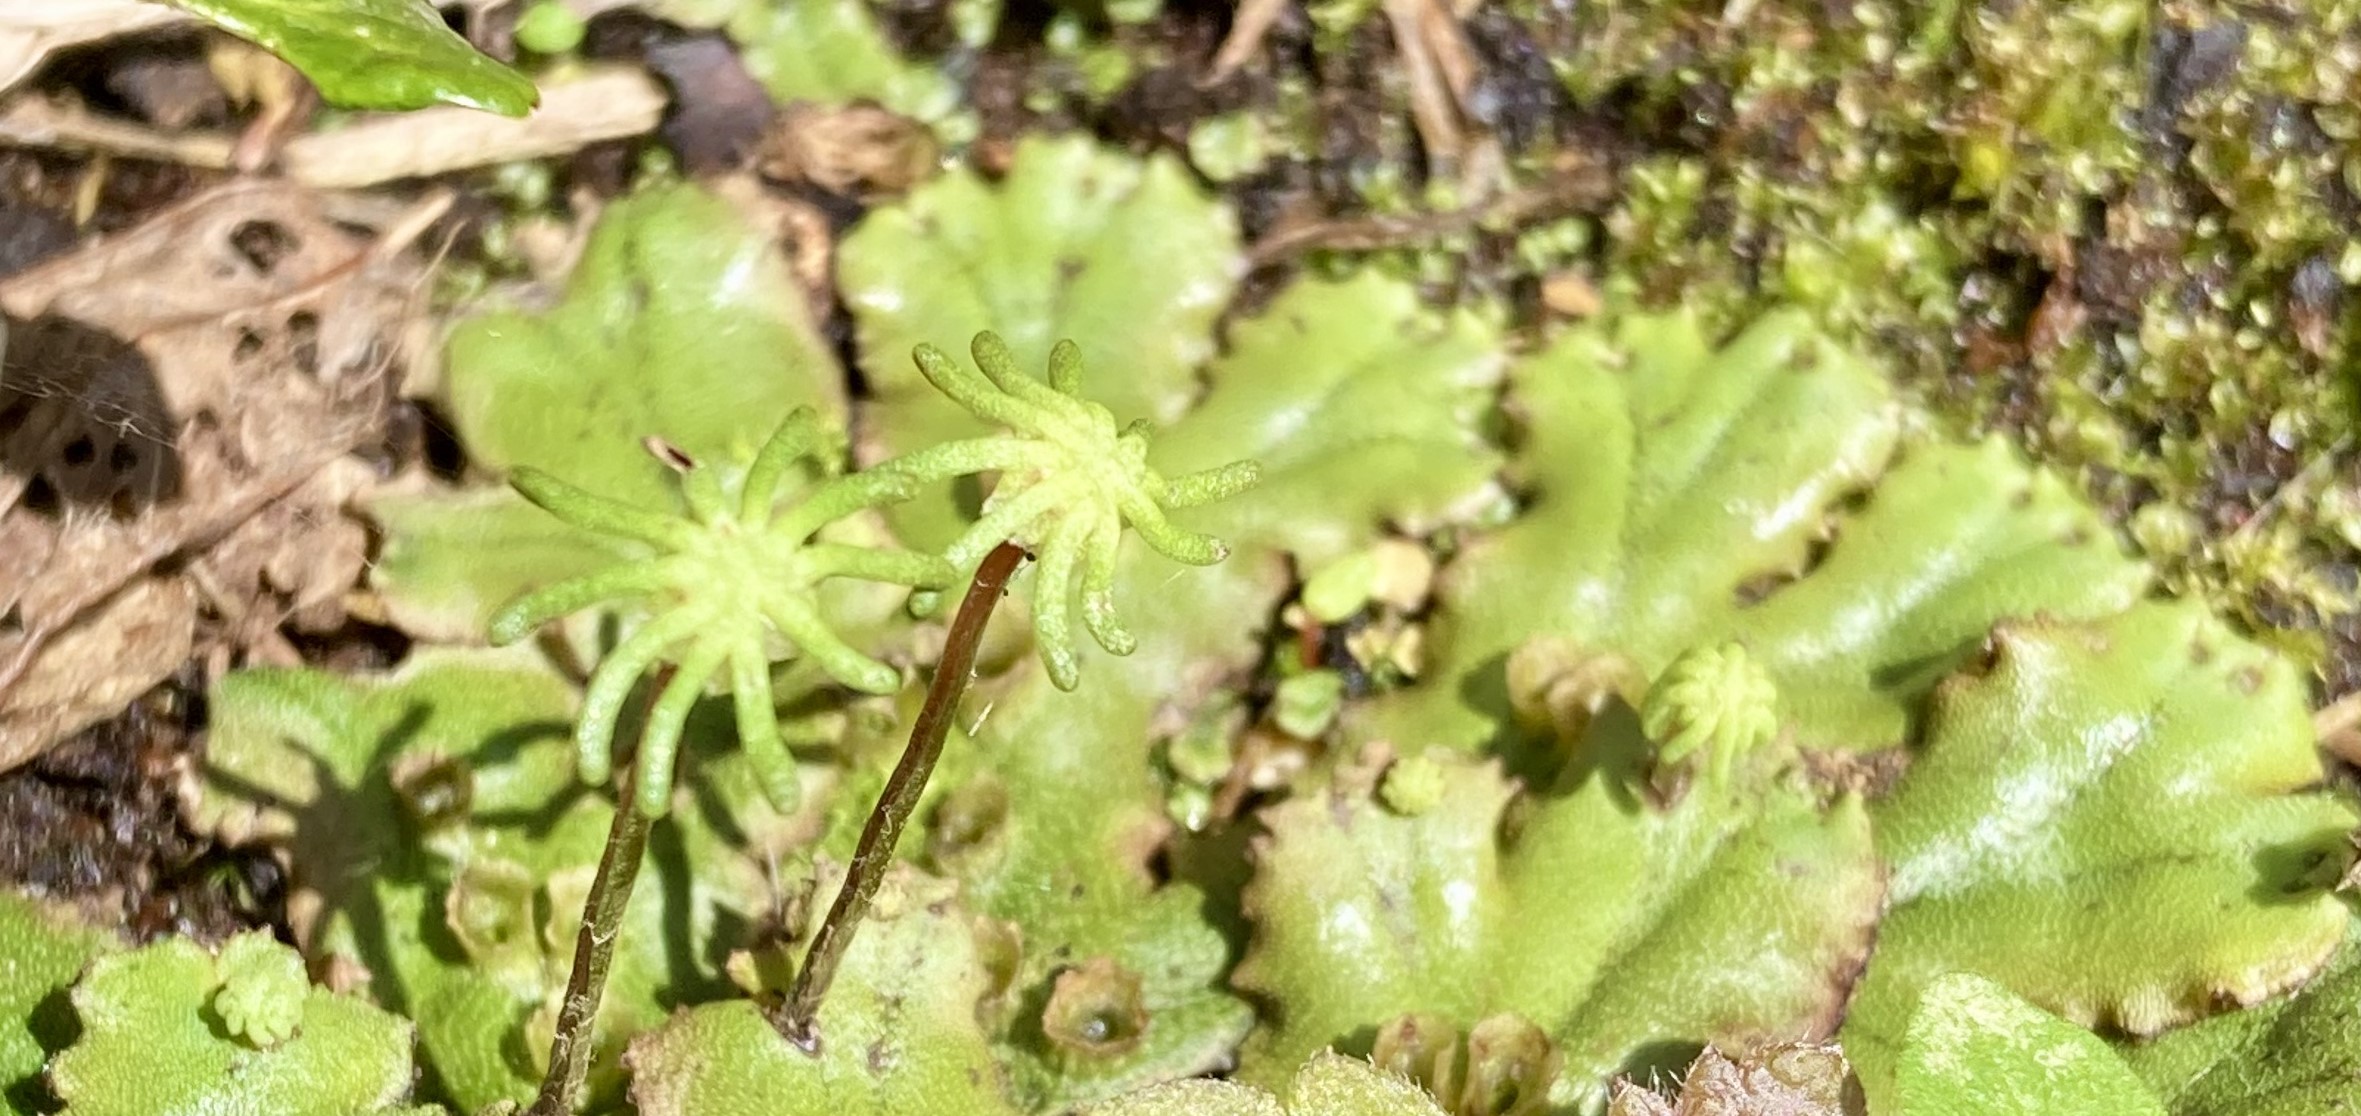 A clump of liverwort in a woodland